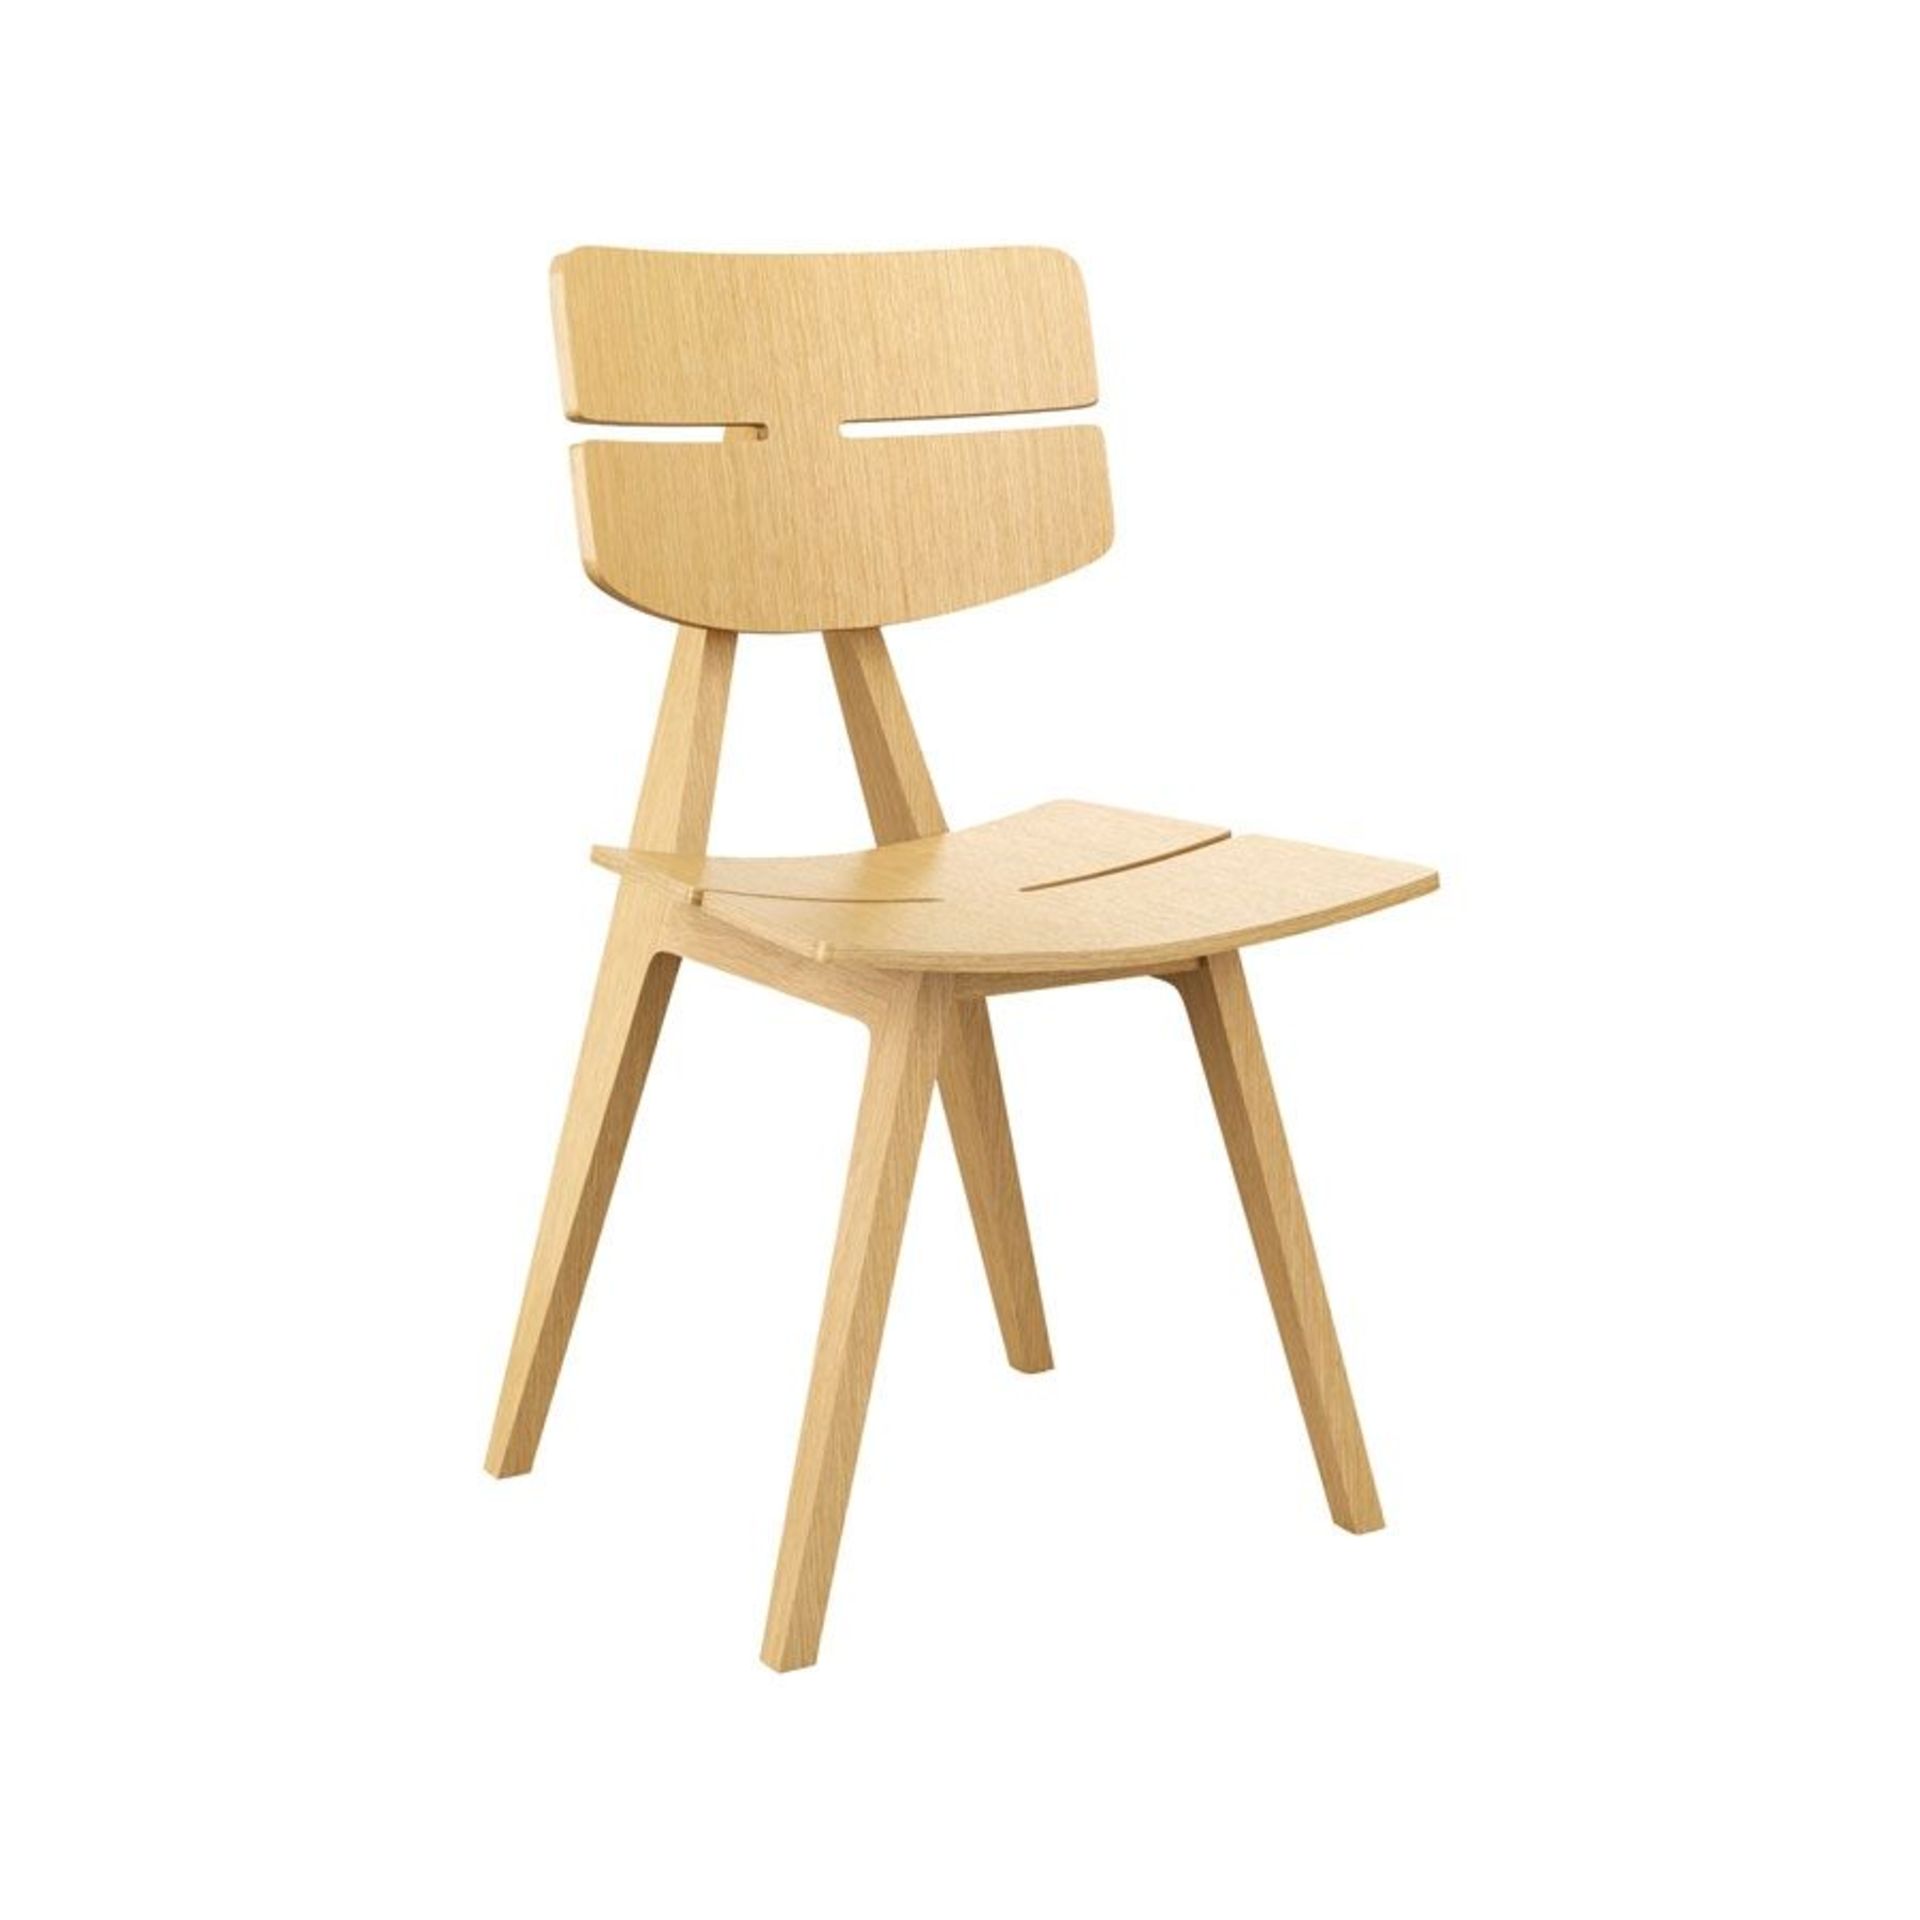 2 x Zest Solid Beech Dining Chairs - New Boxed Stock - RRP £278 - Solid Beech Frame With Curved